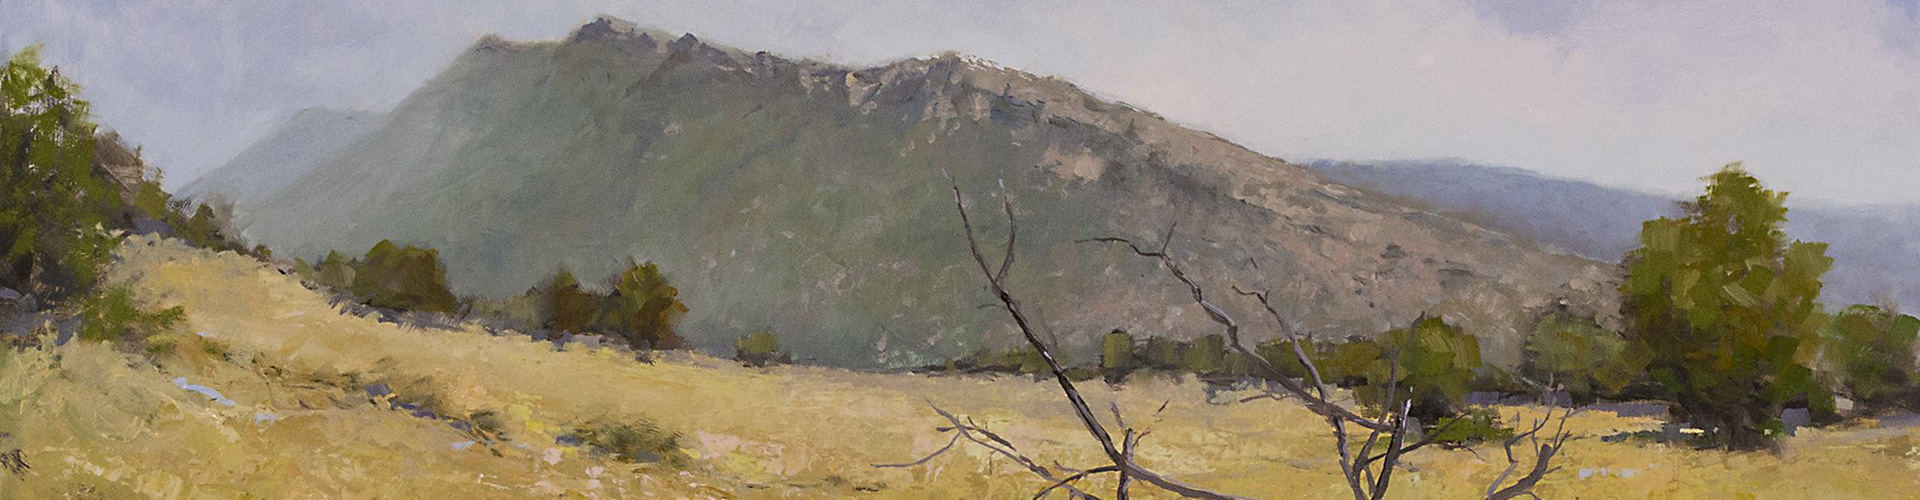 Dale Harding, “Looking North at Rabbit Mountain”